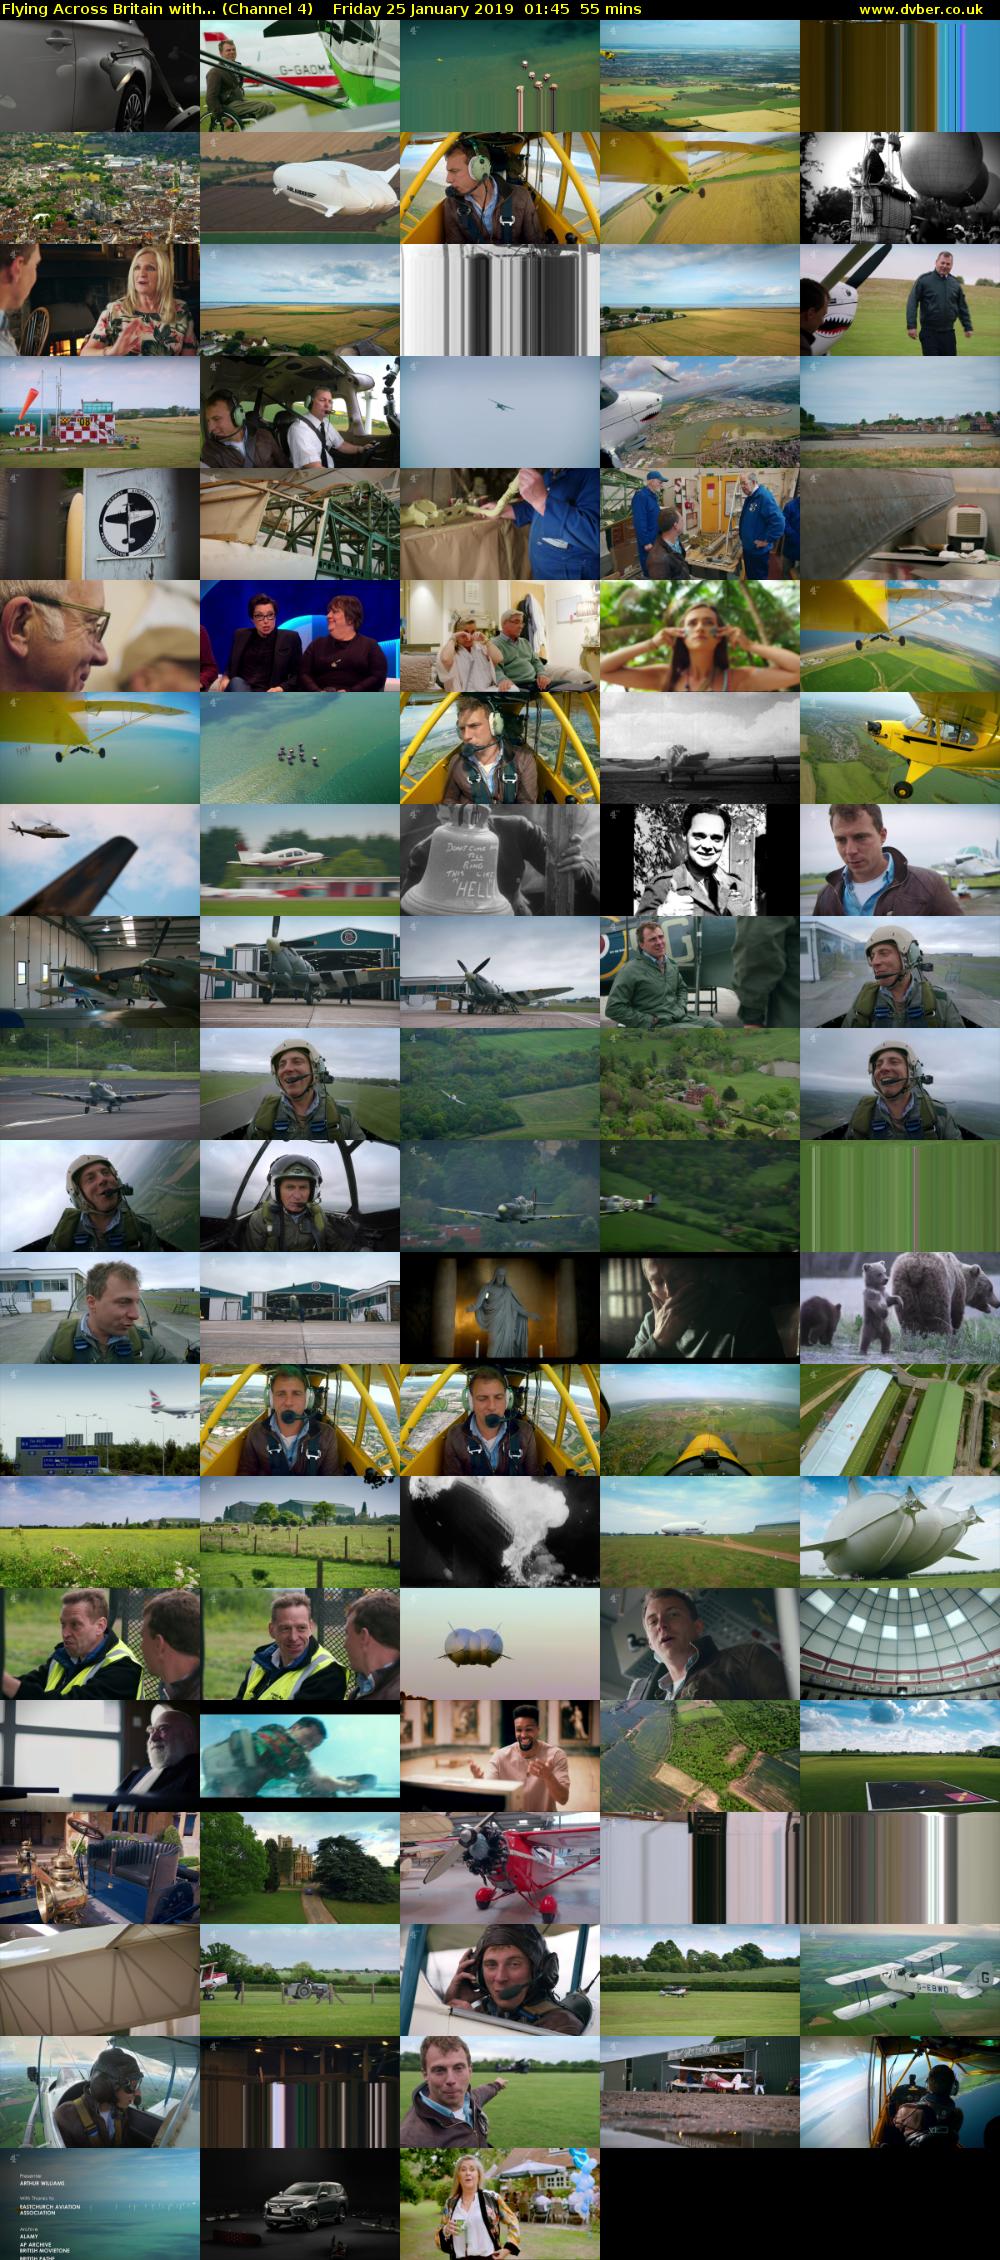 Flying Across Britain with... (Channel 4) Friday 25 January 2019 01:45 - 02:40